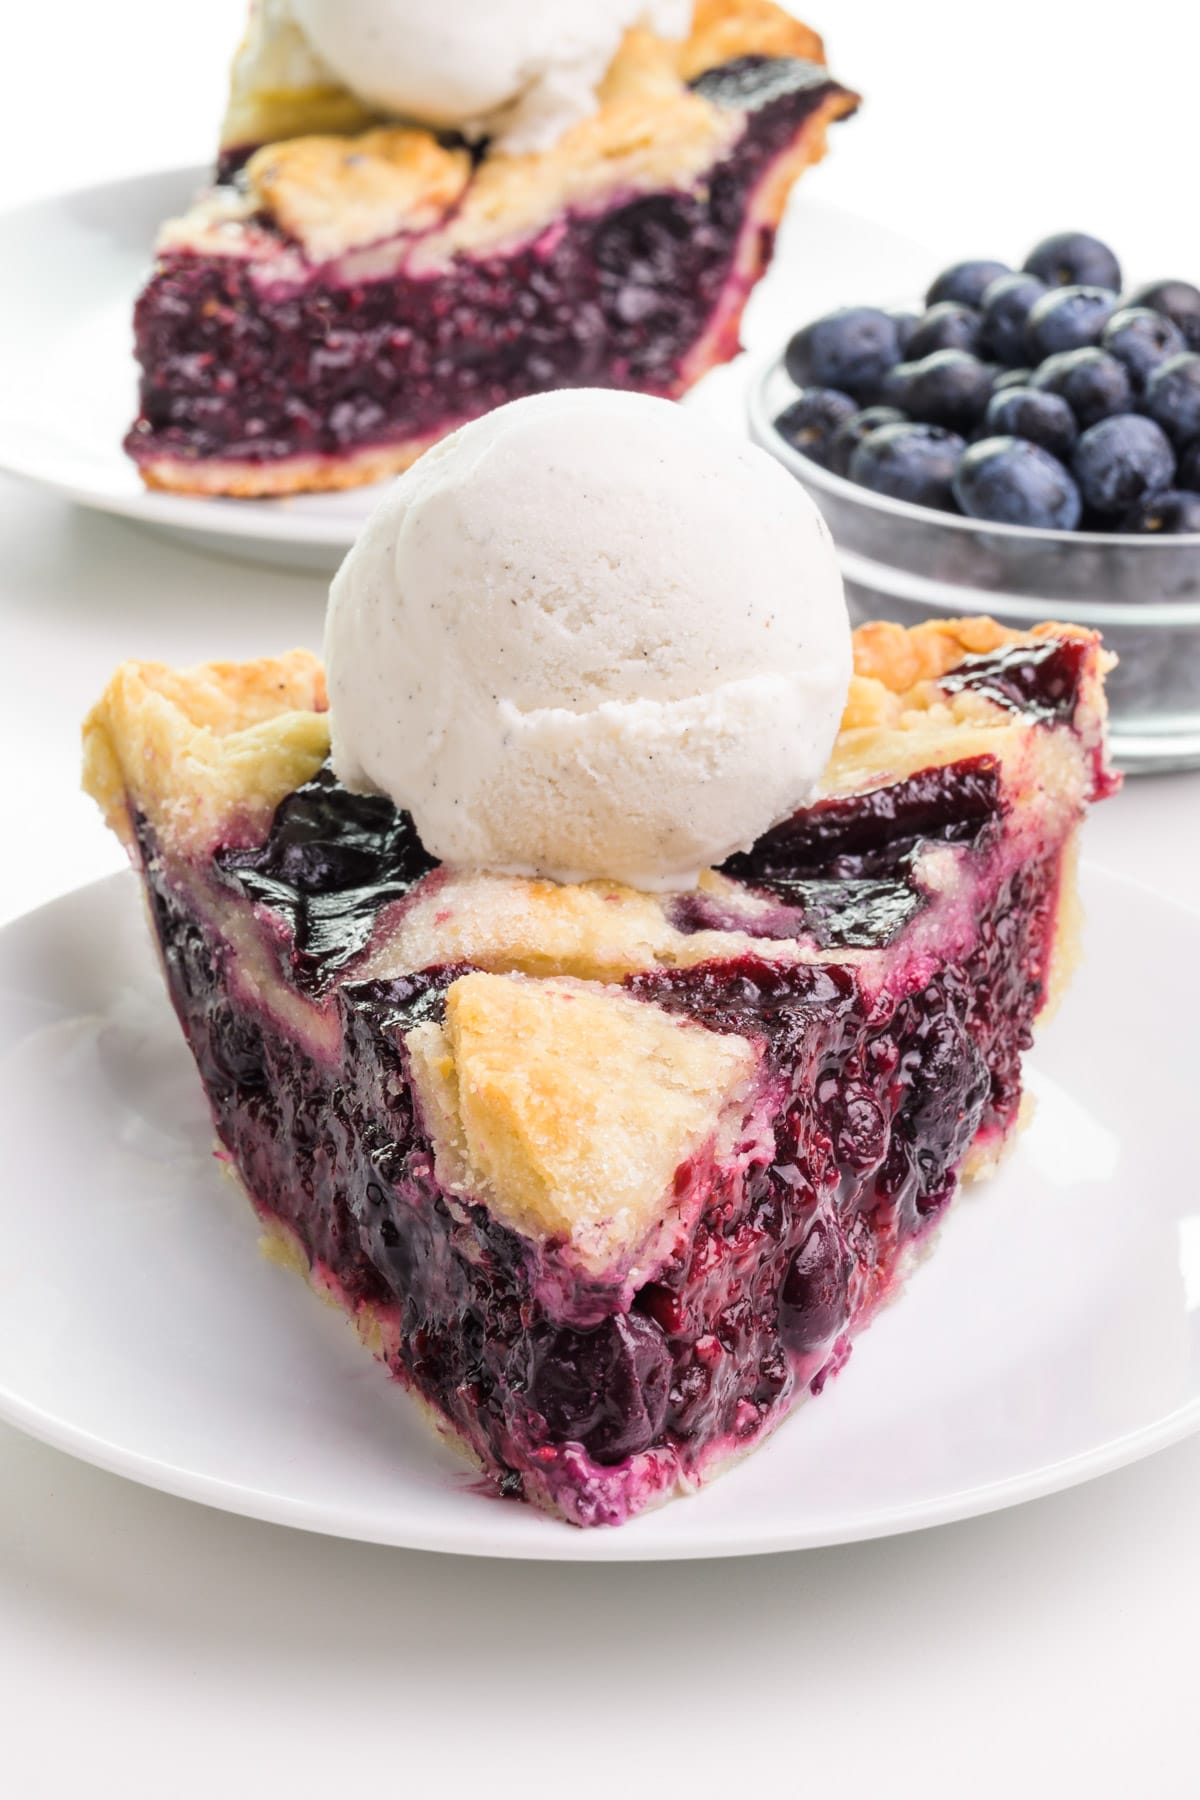 A slice of vegan berry pie sits on a plate.  There is ice cream on top.  Behind it is another slice and a bowl of fresh blueberries.